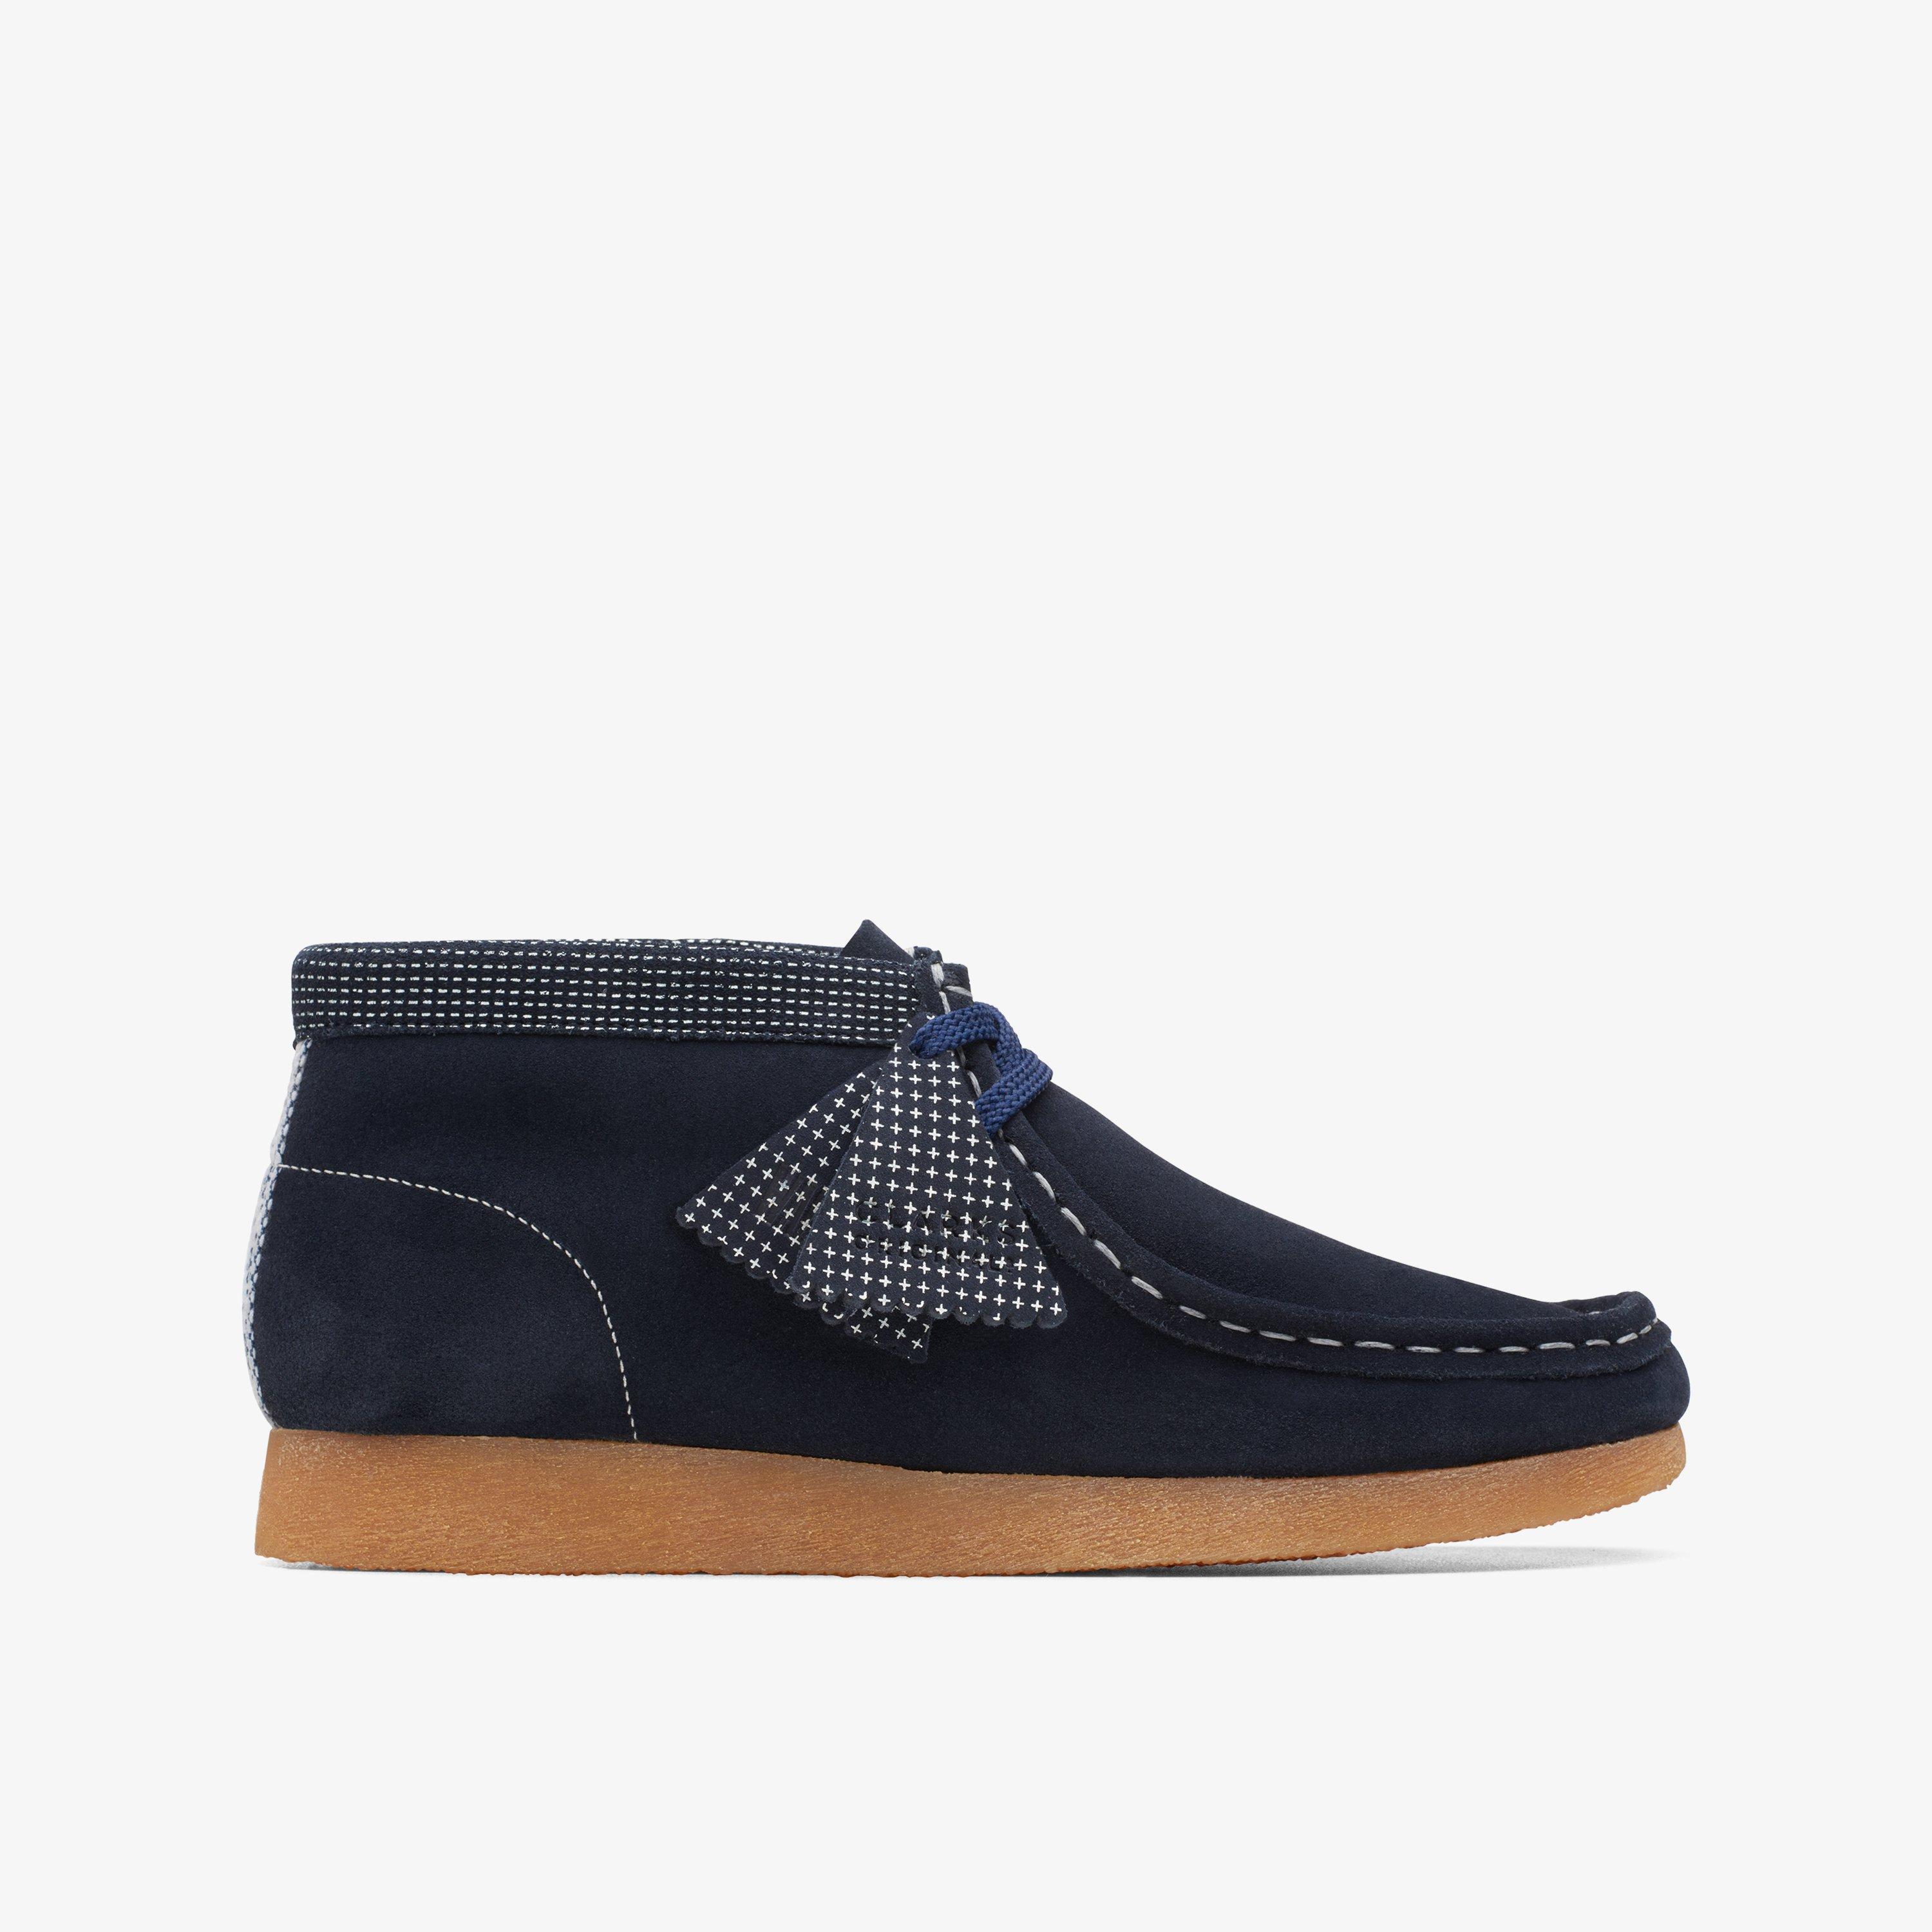 BOYS Wallabee Boot Older Navy Combination Boots | Clarks US